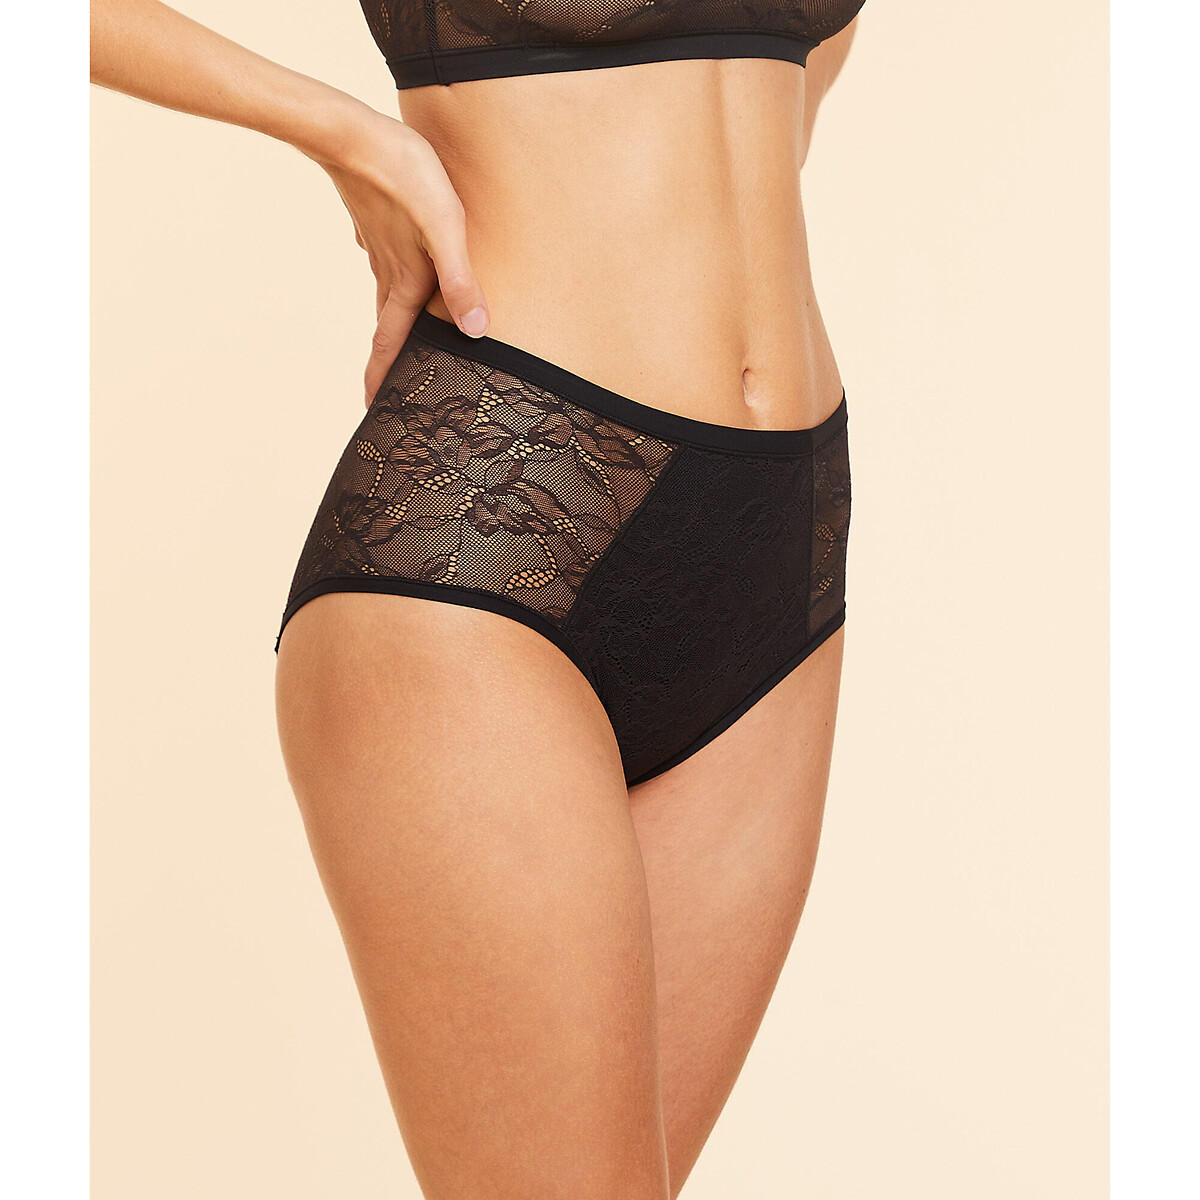 Tila Lace Period Knickers with High Waist